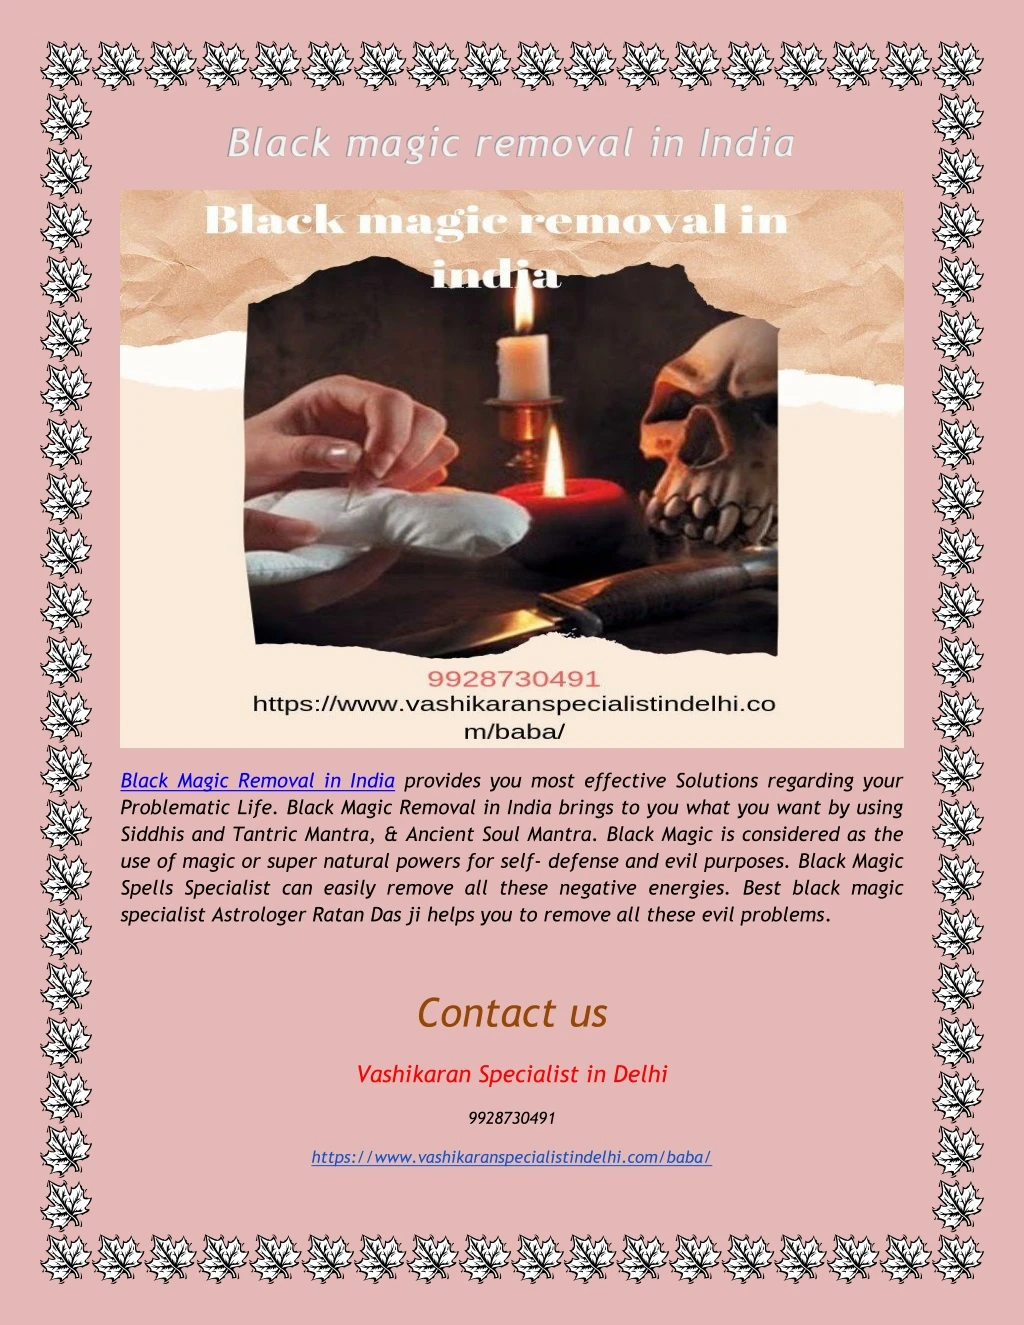 black magic removal in india provides you most